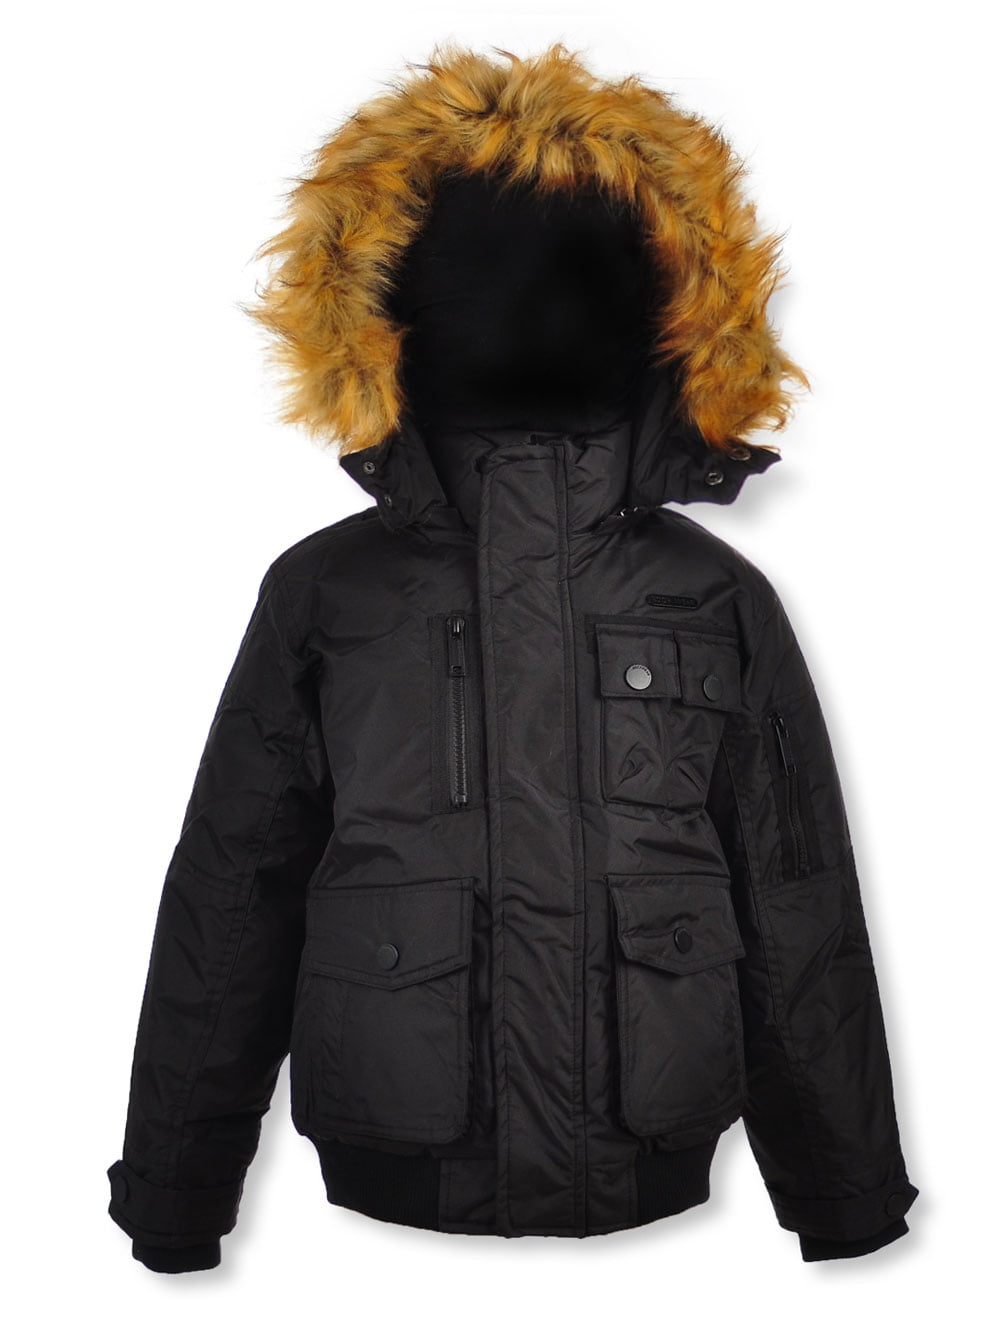 Rocawear boys Outerwear Jacket Down Alternative Coat Clothing & Accessories  Outerwear